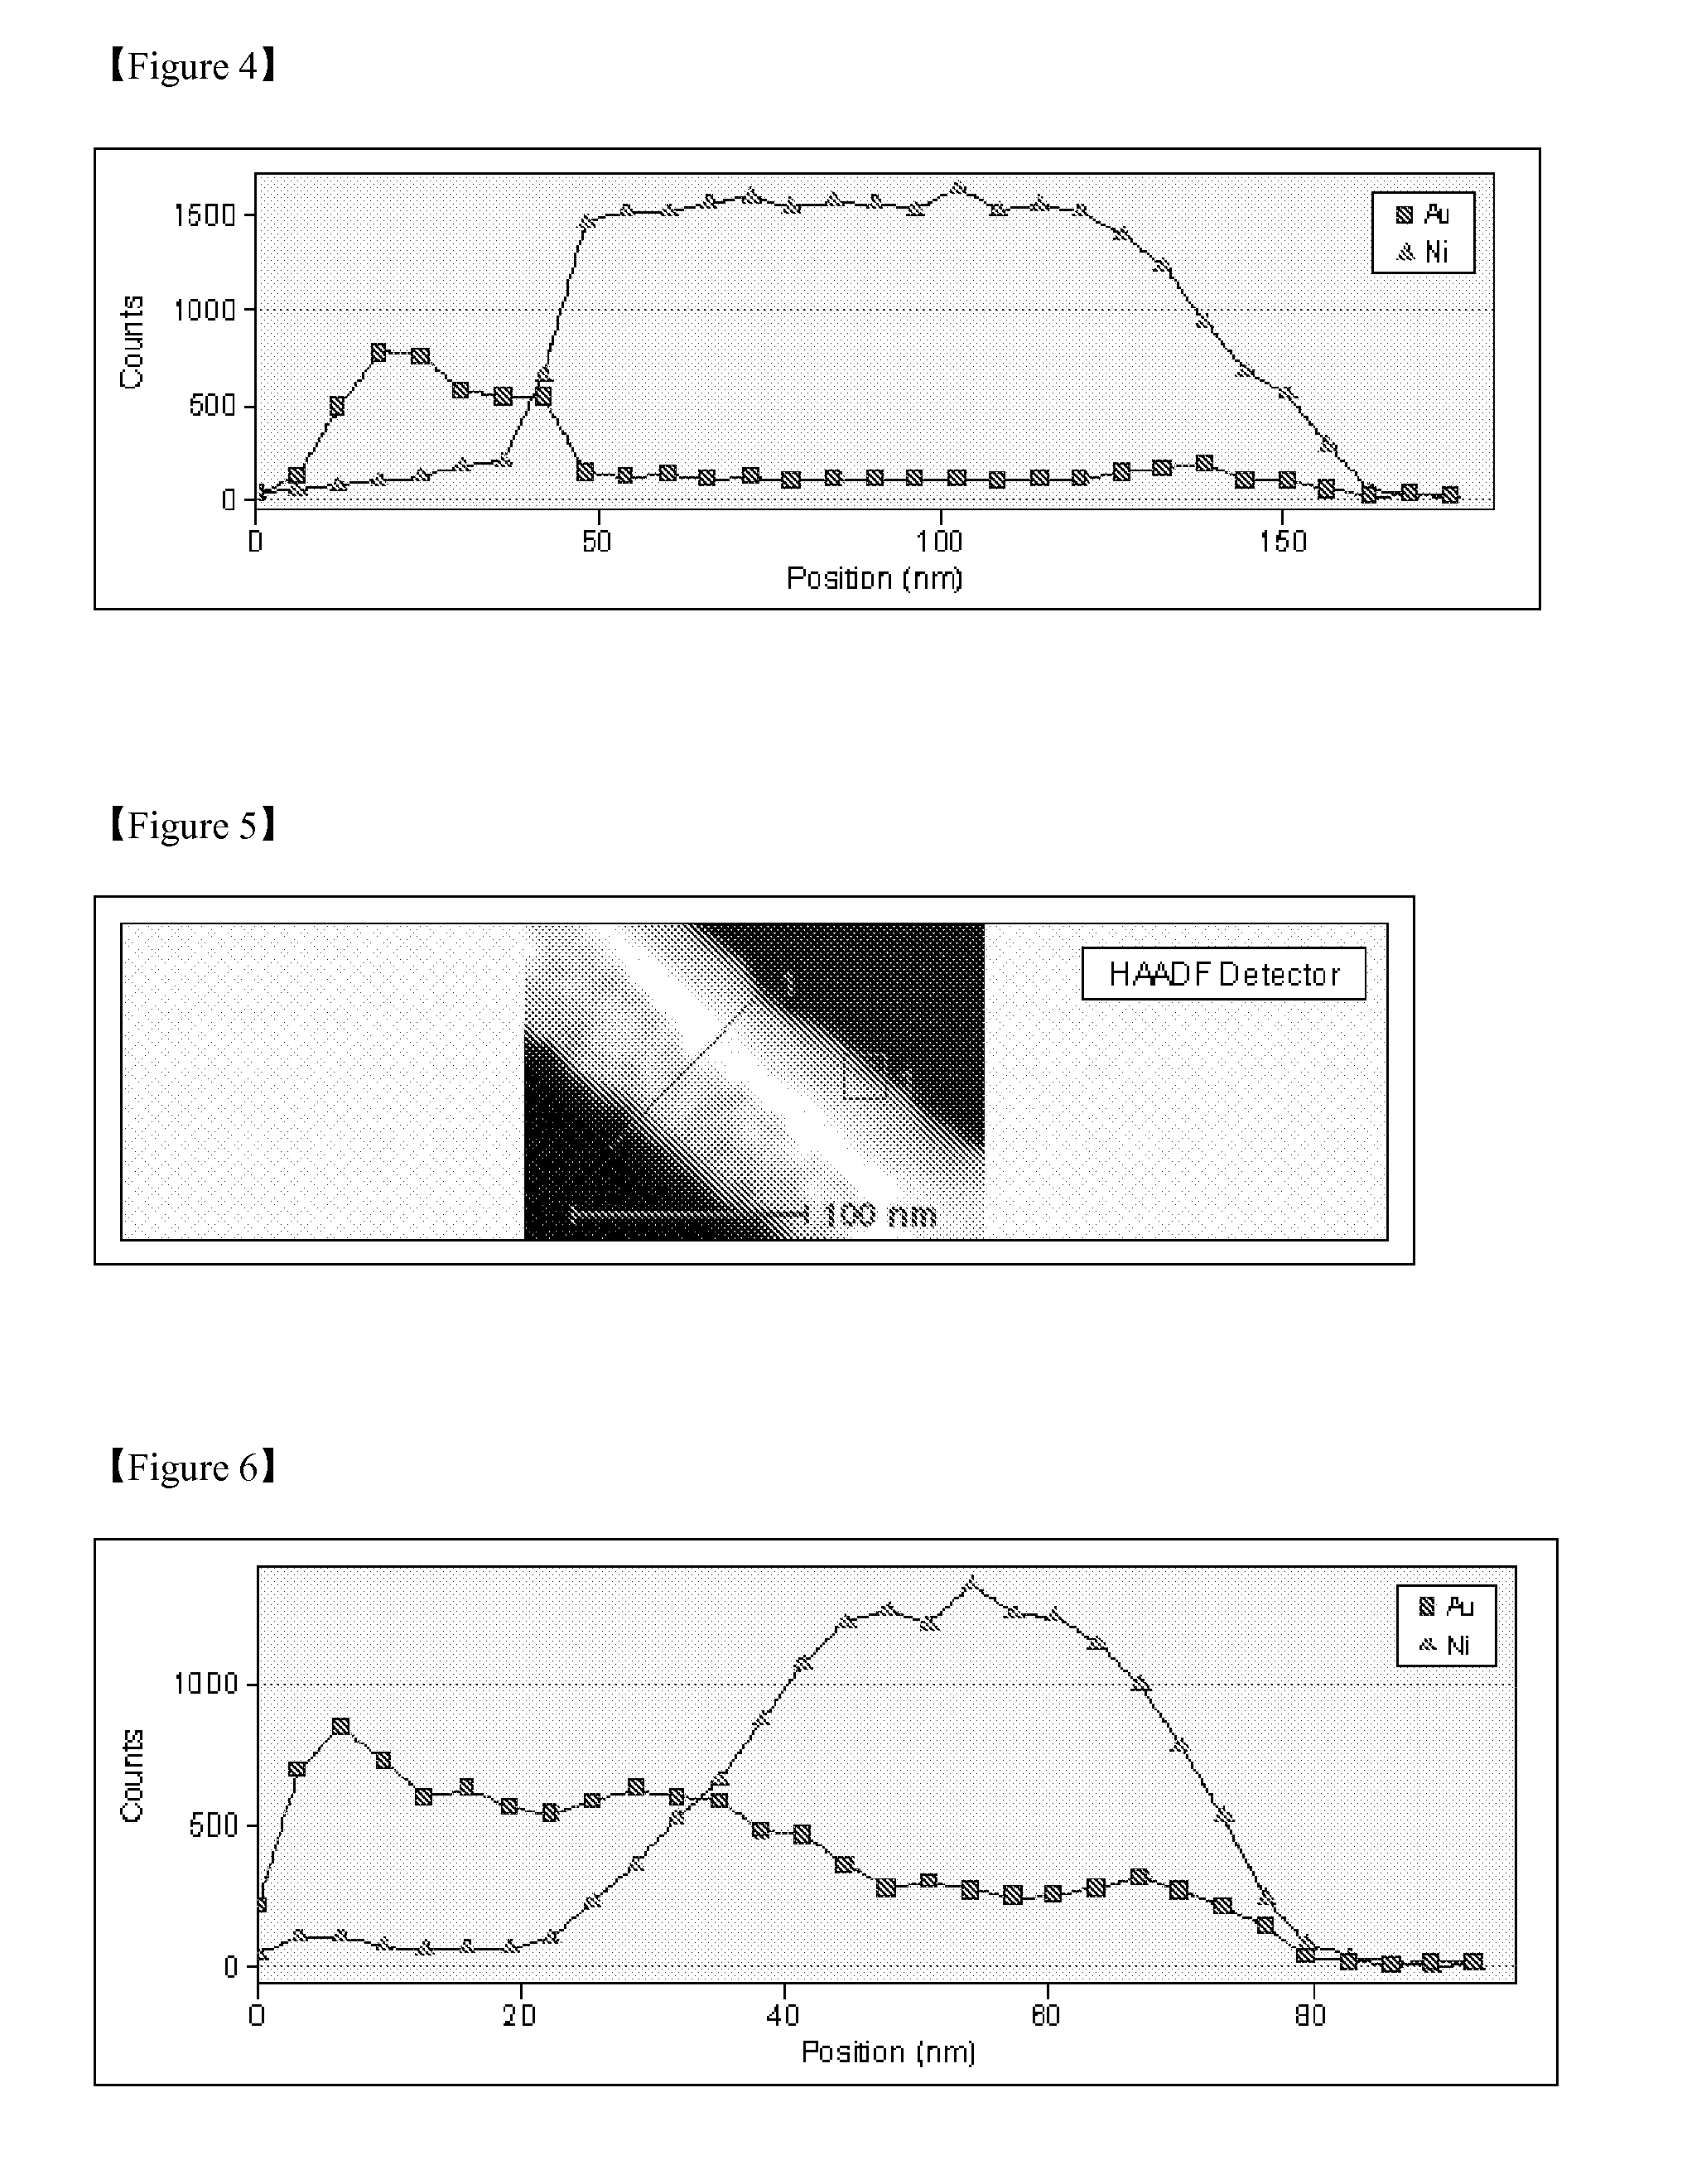 Conductive Particles Comprising Complex Metal Layer With Density Gradient, Method for Preparing the Particles, and Anisotropic Conductive Adhesive Composition Comprising the Particles